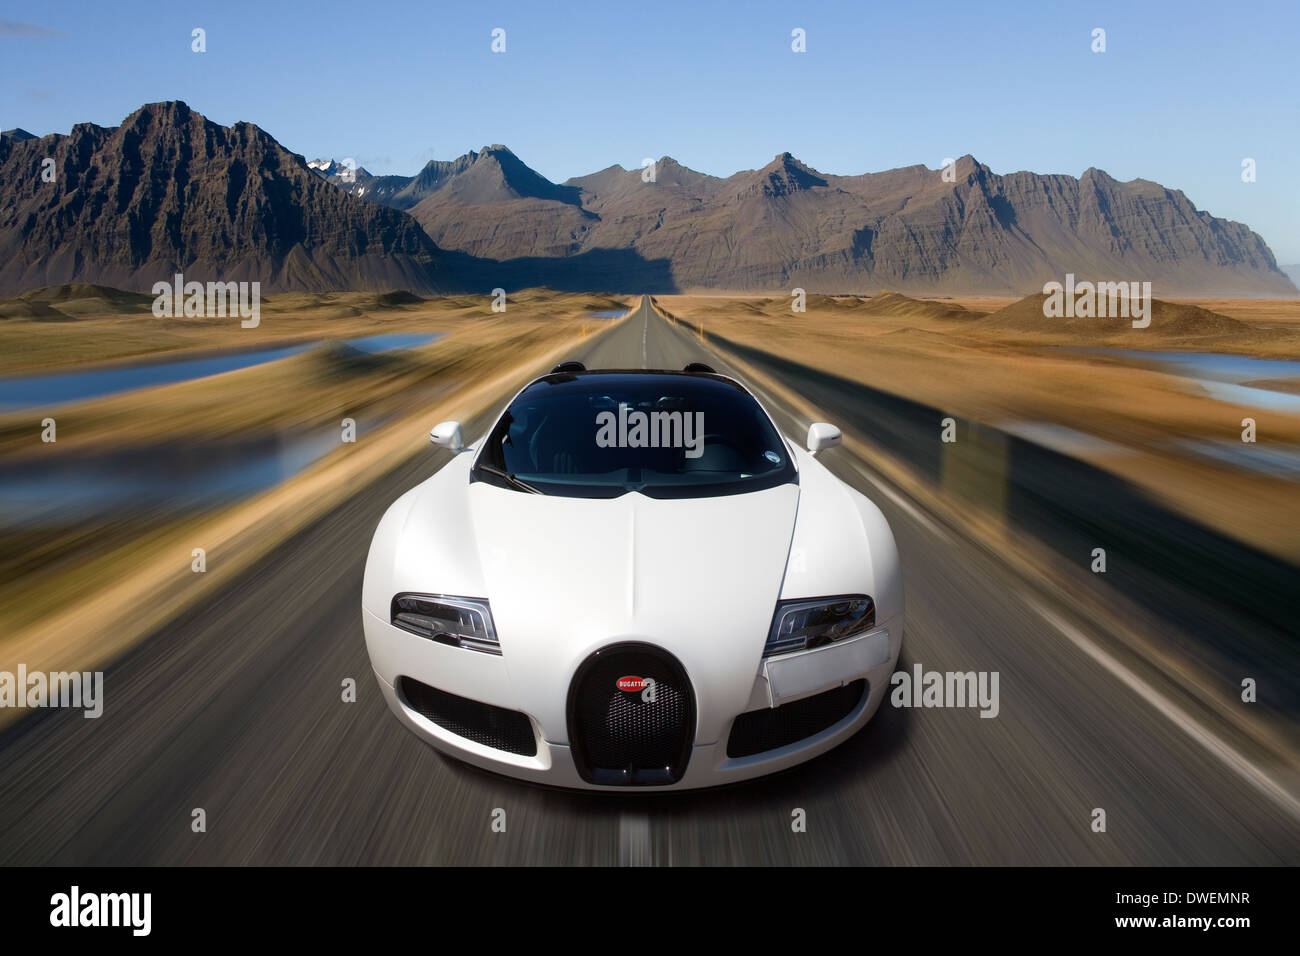 Bugatti Veyron EB 16.4 driving at speed in Iceland Stock Photo